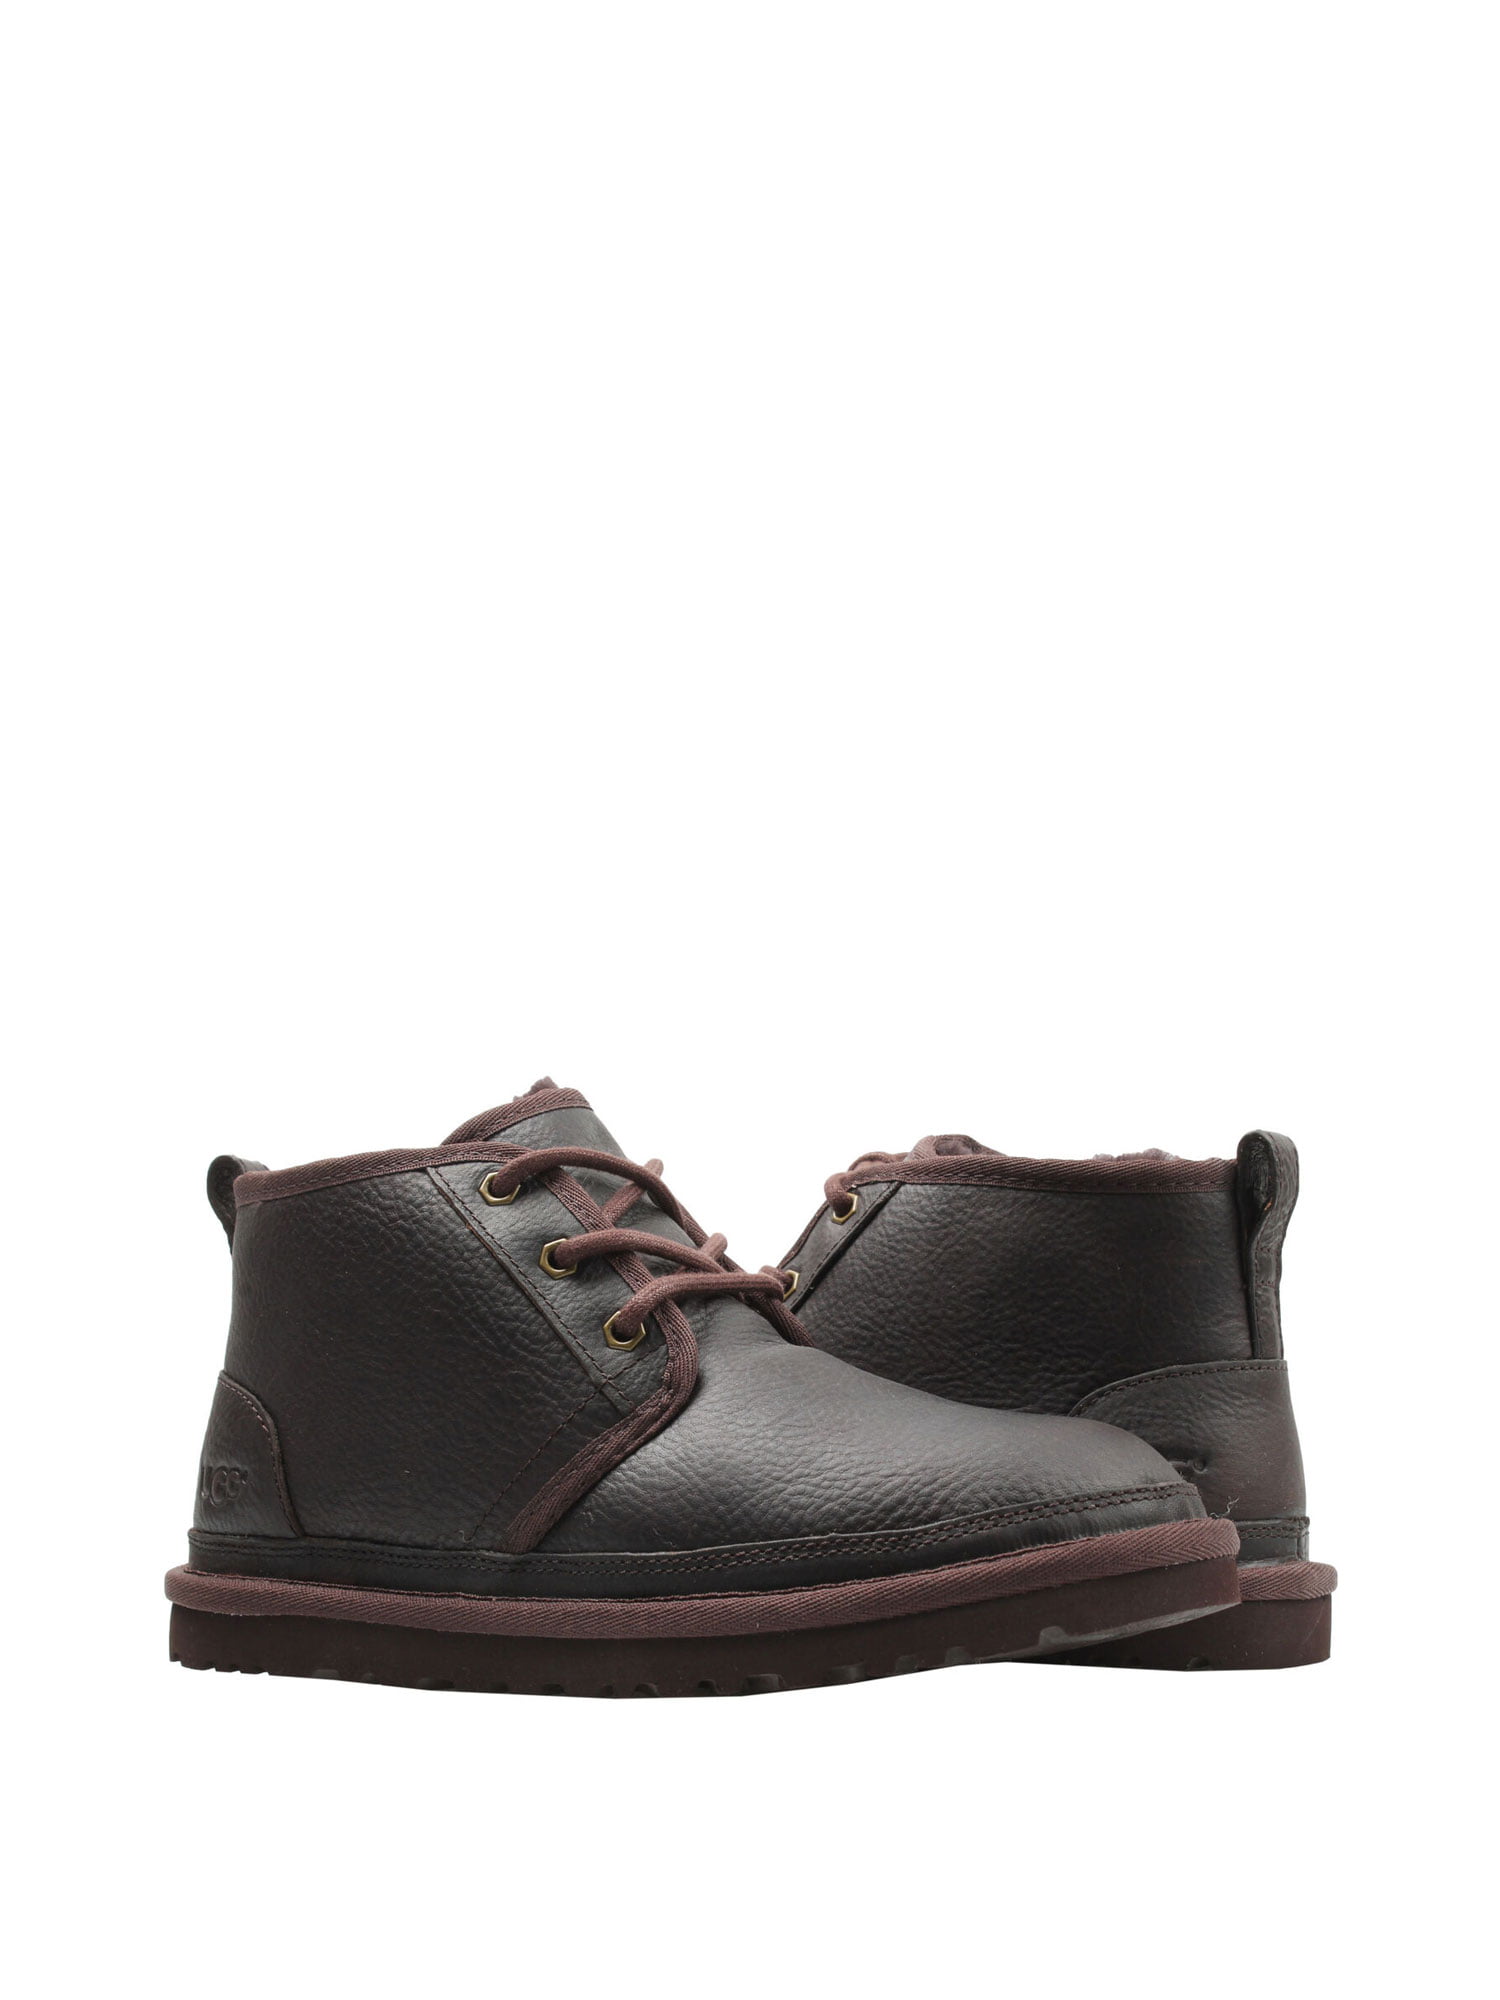 undisclosed ugg neumel china tea brown leather black chestnut gray suede men mid top boot